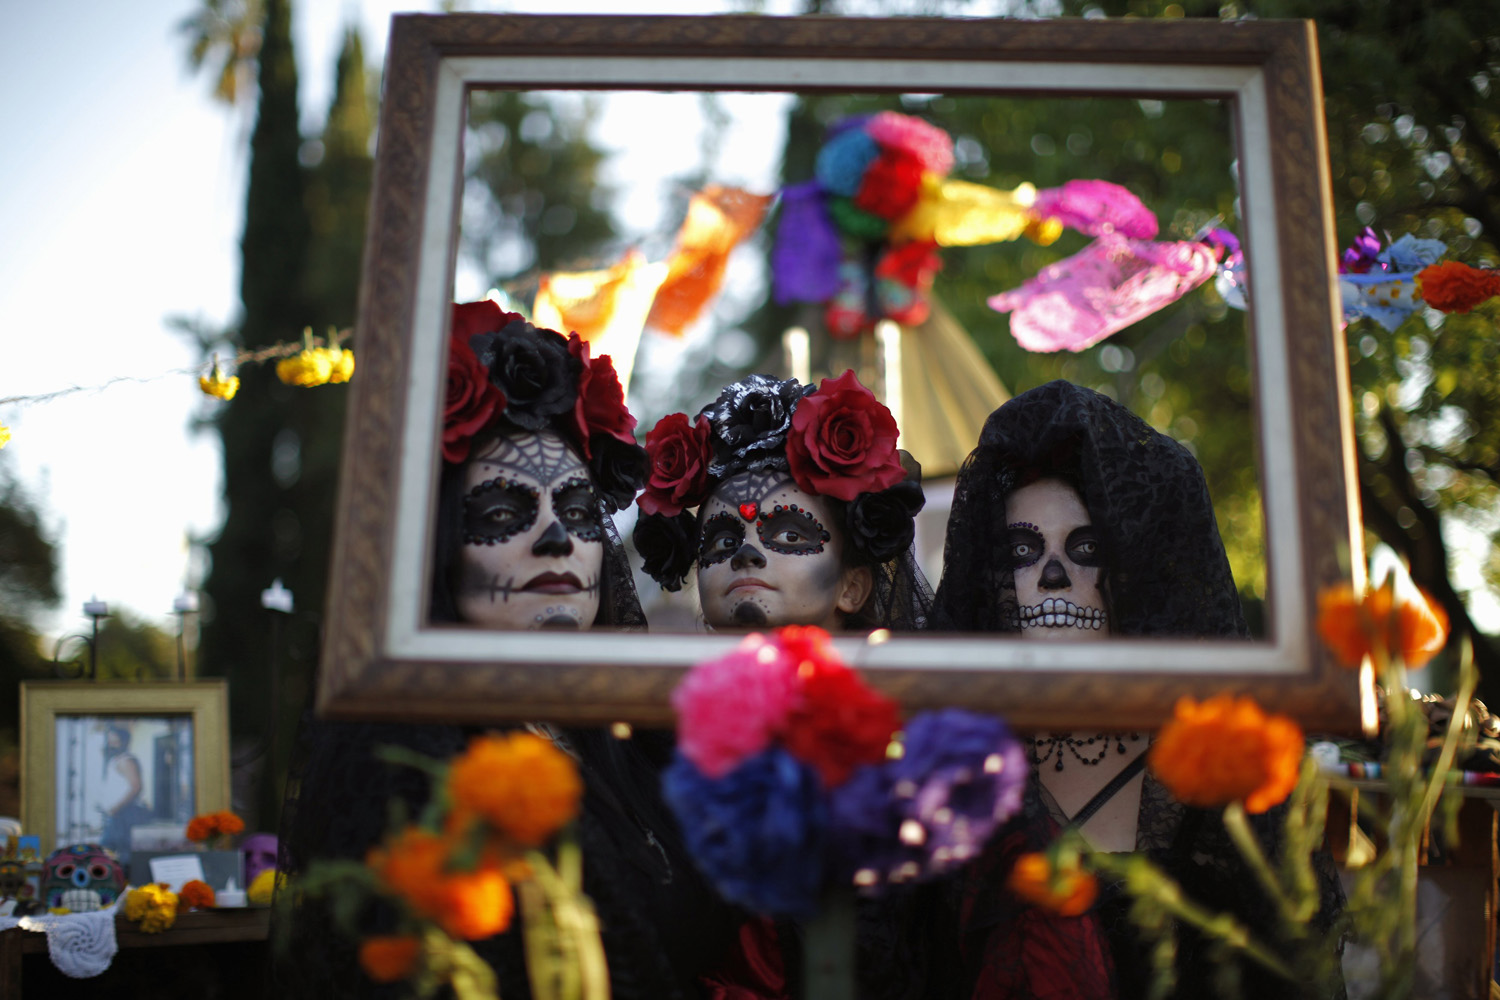 Giron and her daughter Walters pose in a picture frame on an altar during the 14th annual Dia de los Muertos festival at Hollywood Forever Cemetery in Los Angeles